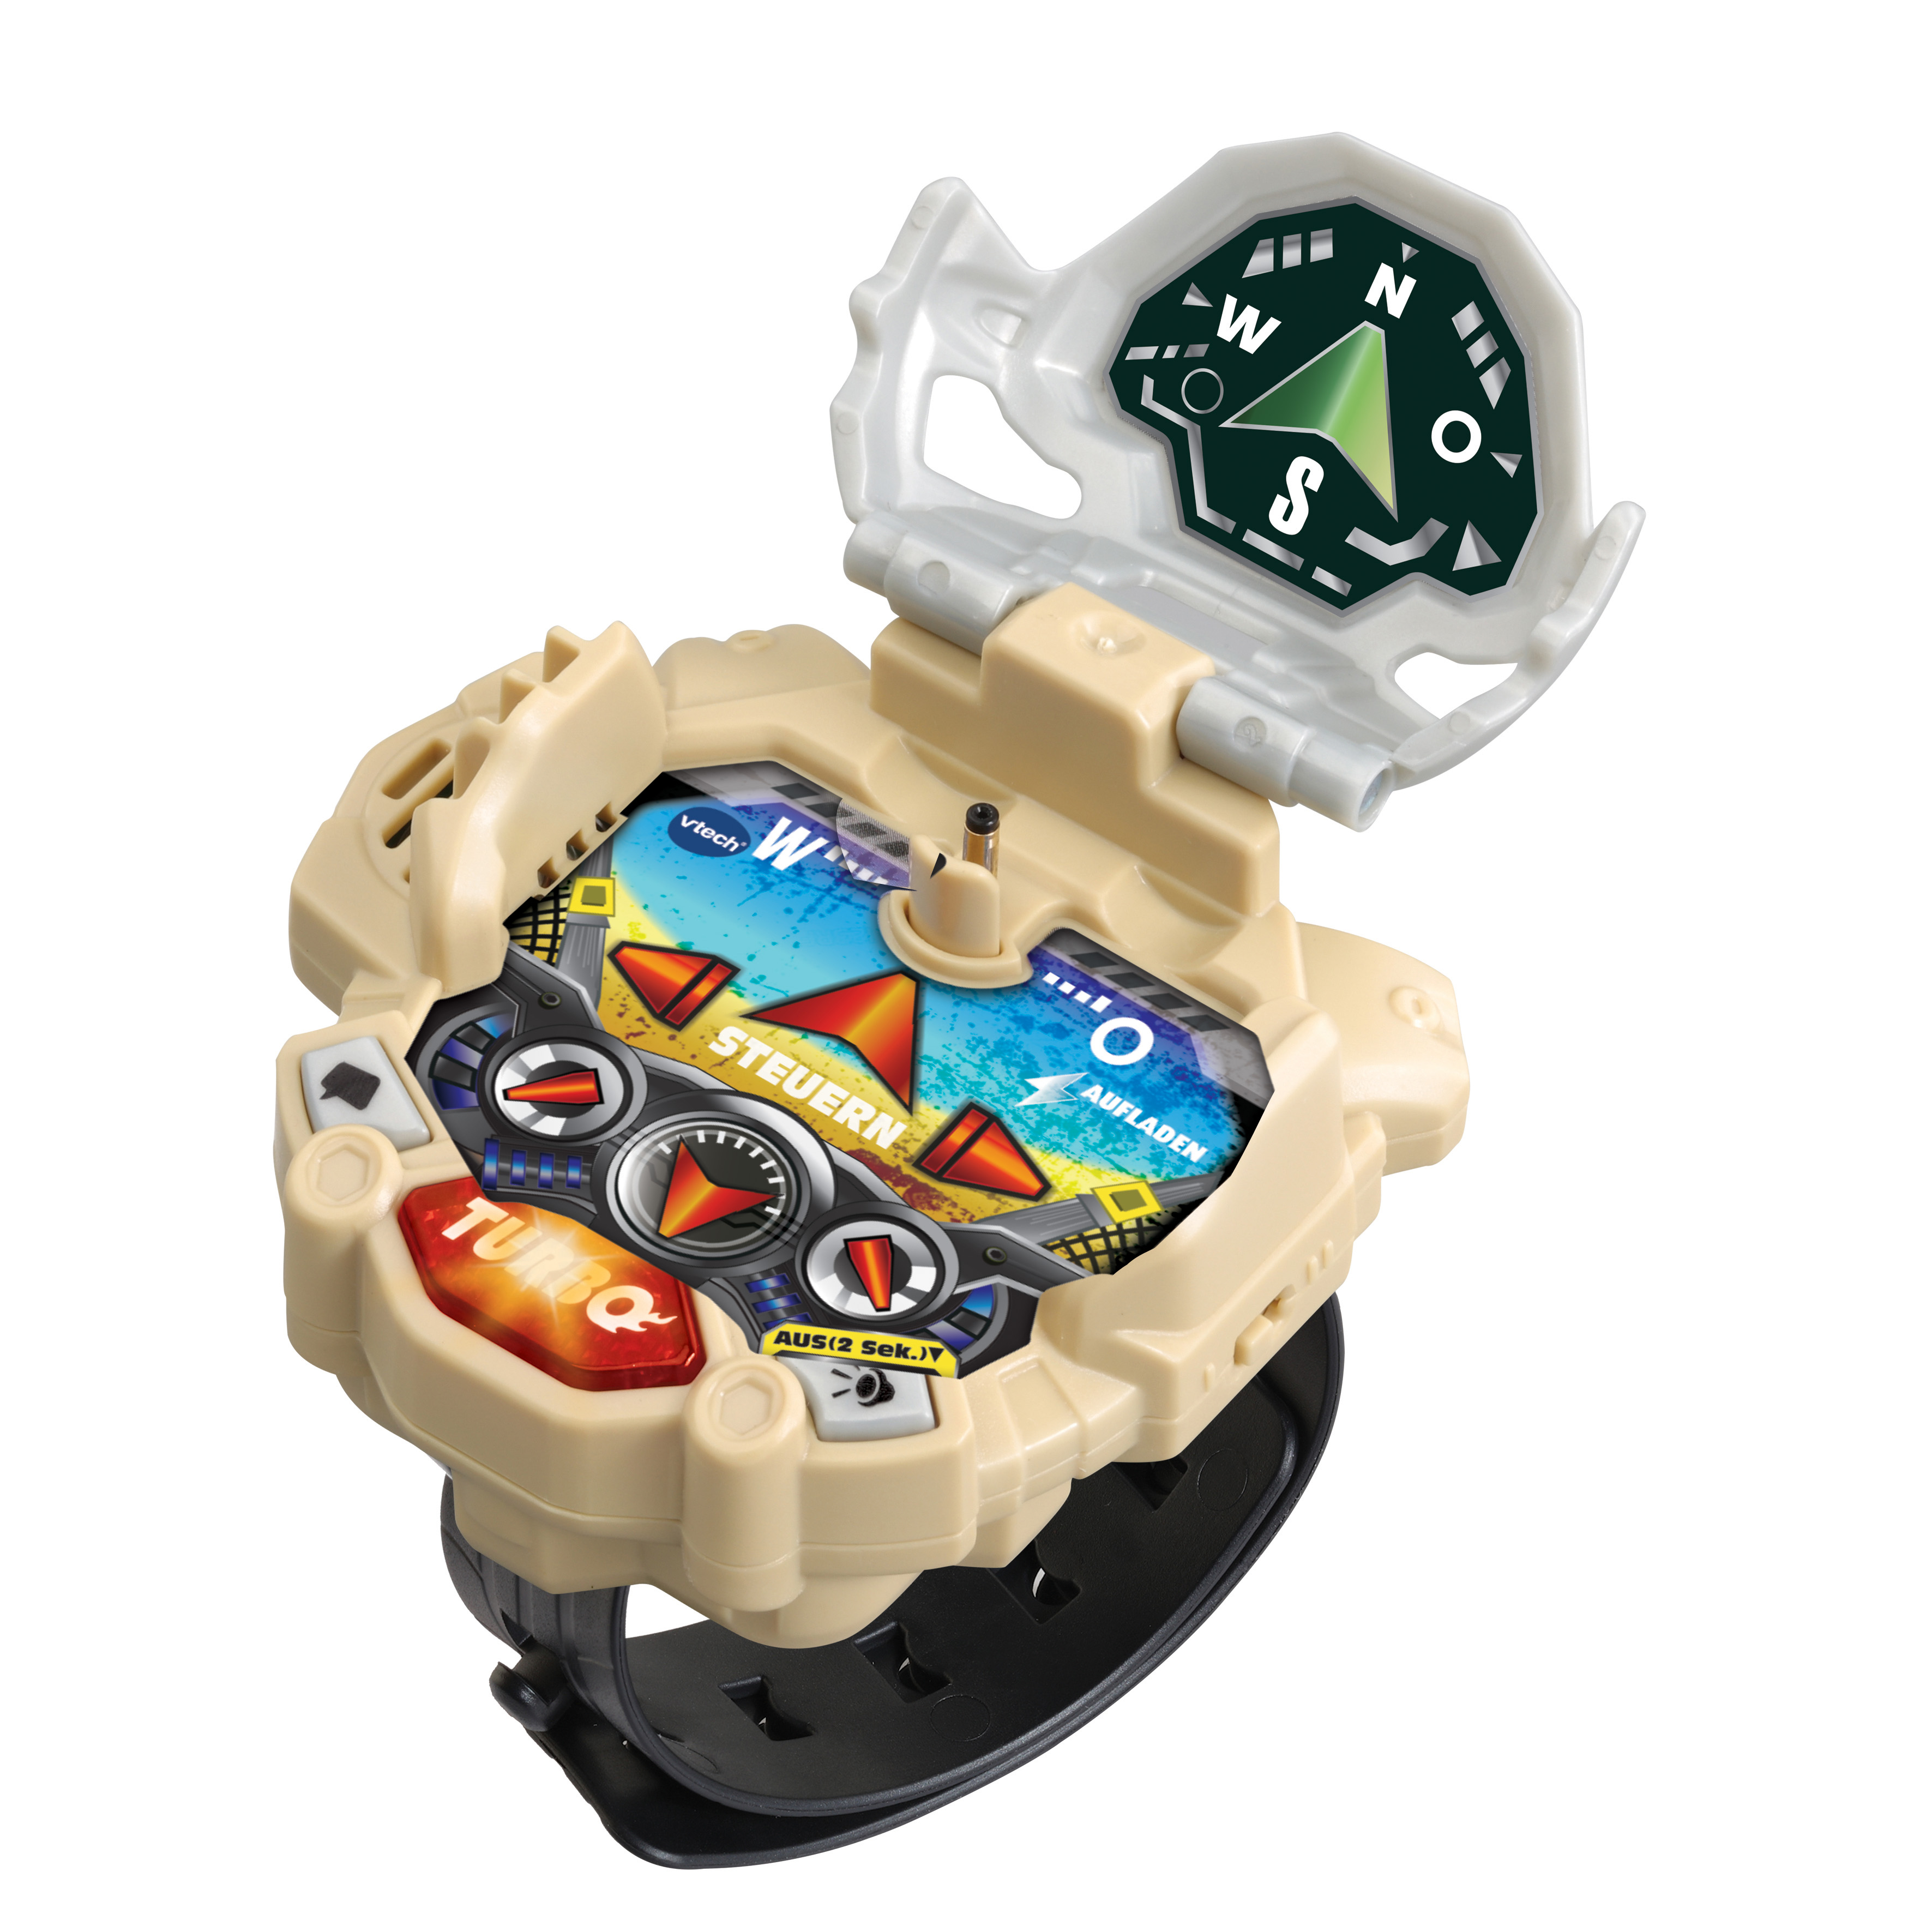 Racers Mehrfarbig Car Force Spielzeugauto, Offroad Turbo - VTECH